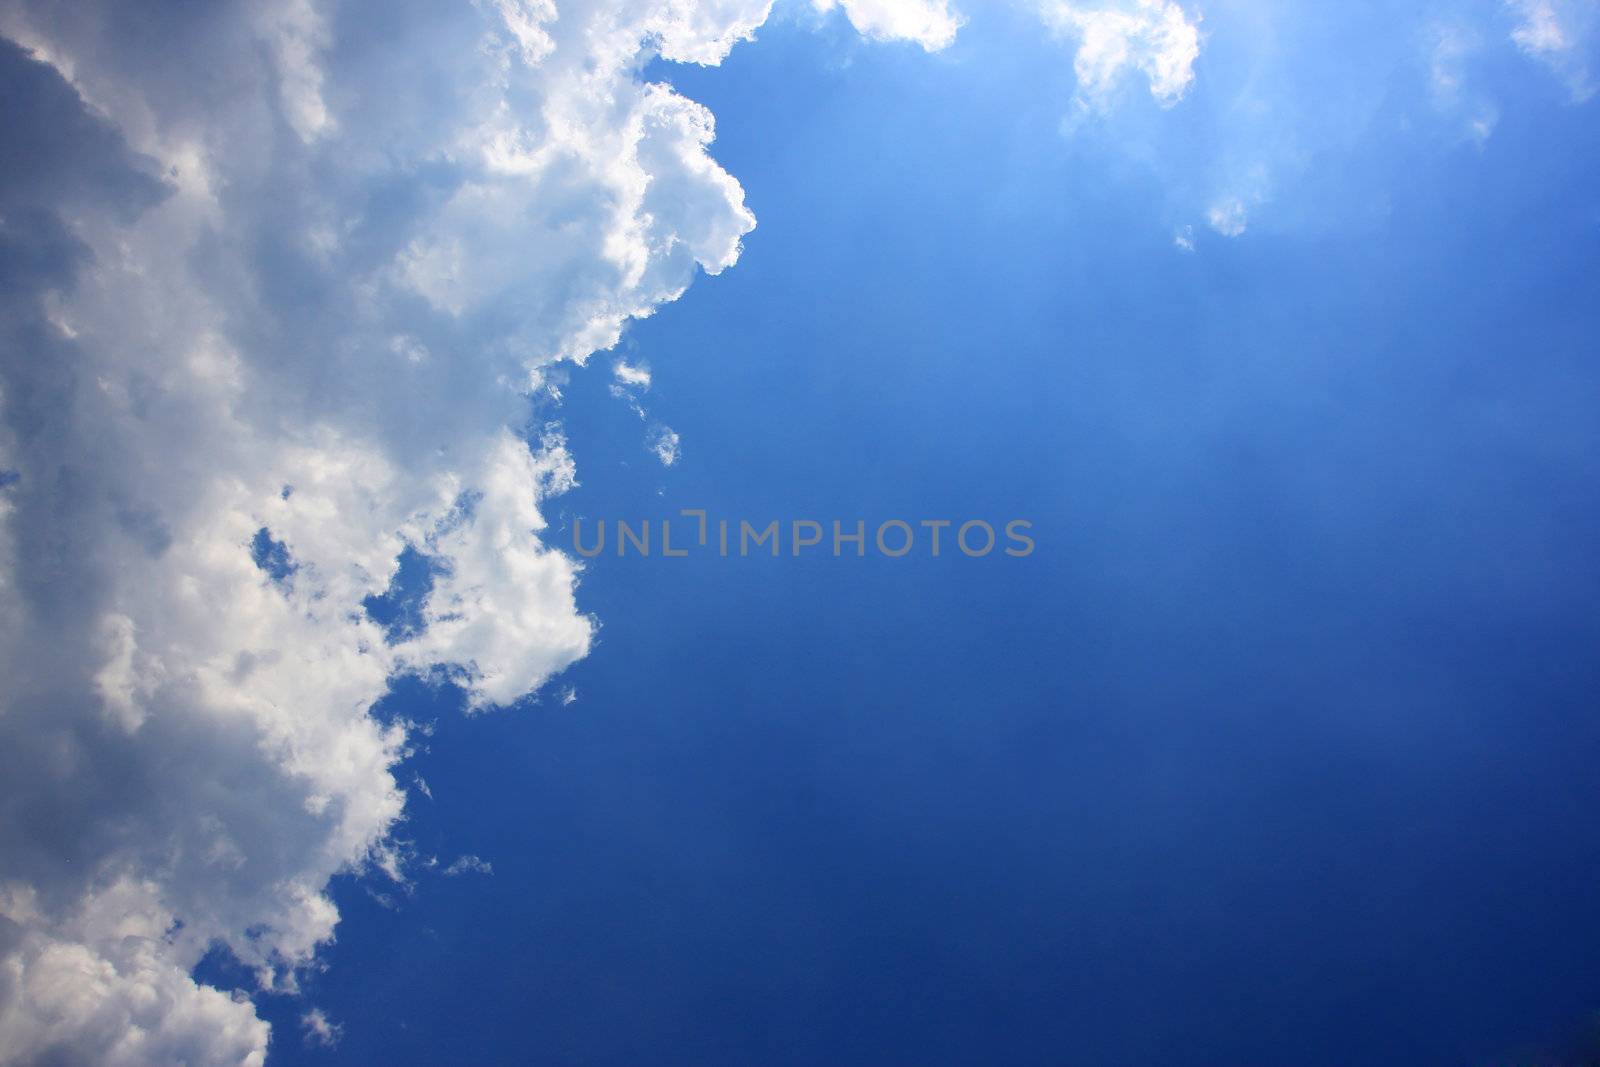 clouds on a blue sky, great copy space, great for backgrounds or messages